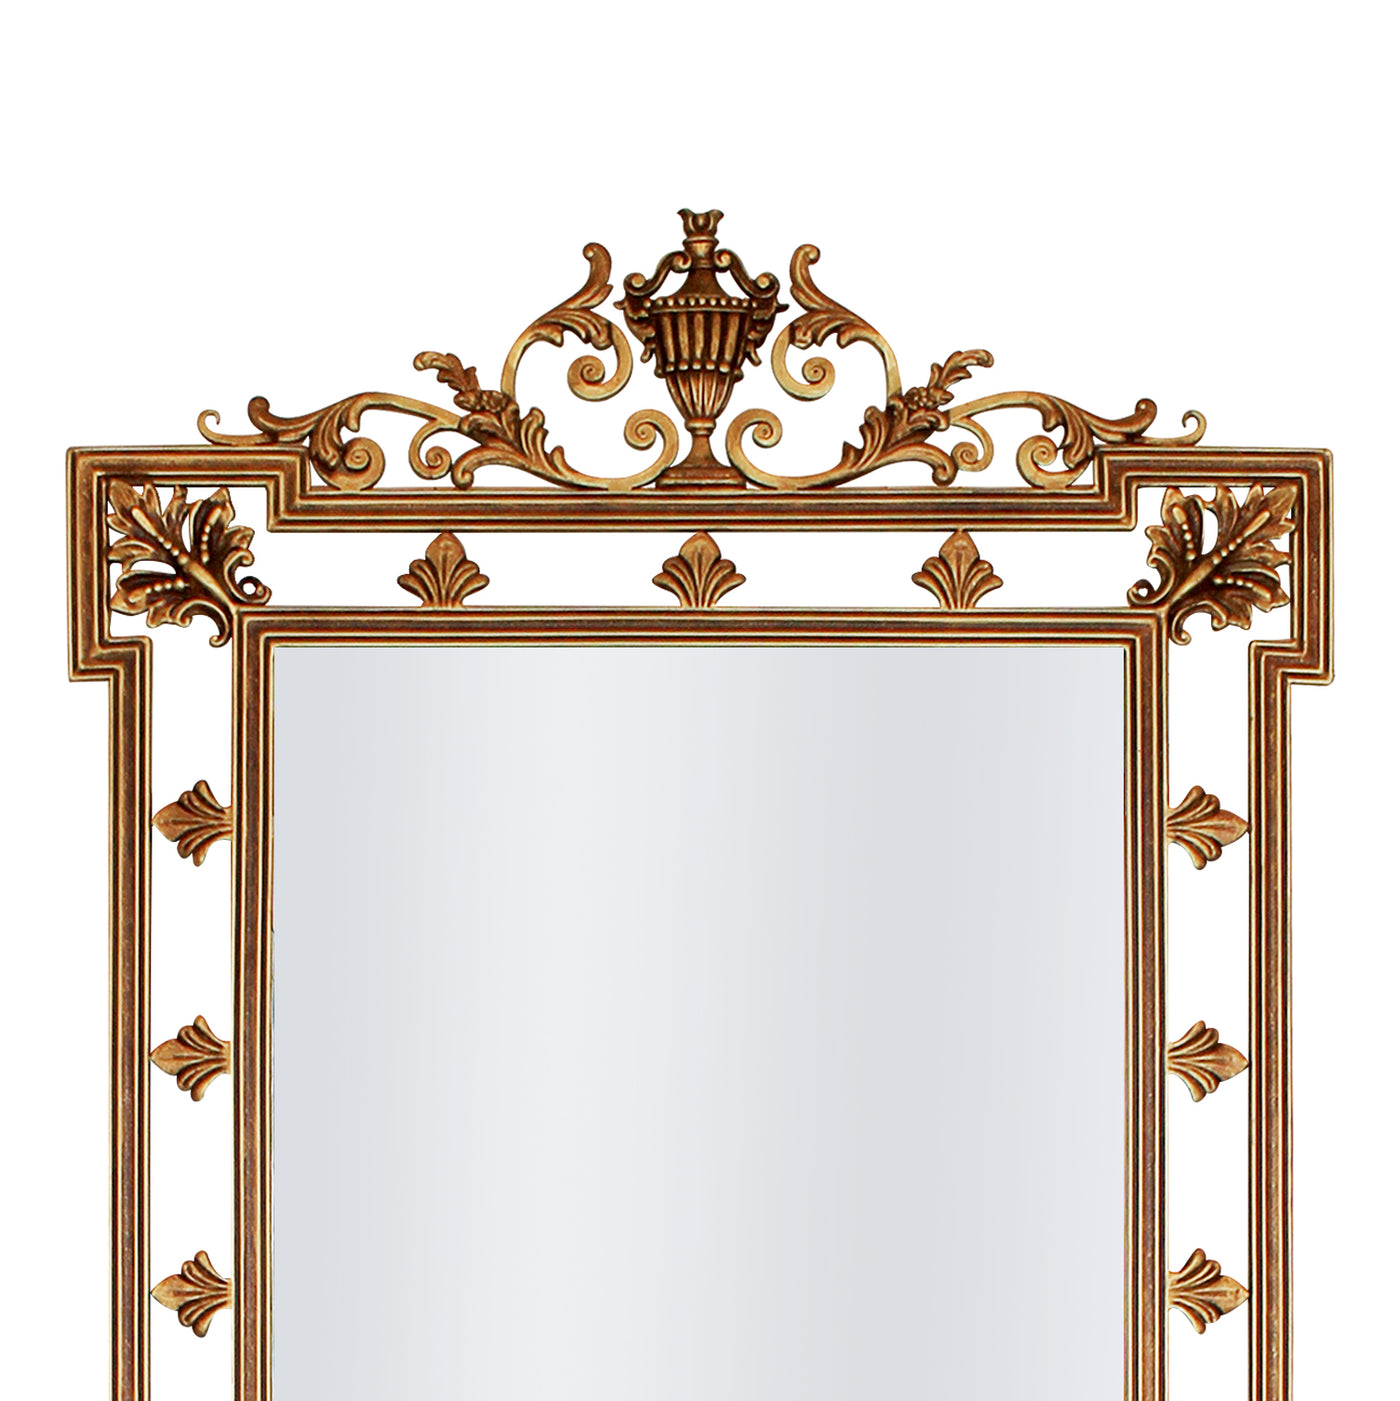 A close up of a rectangular hand forged mirror with classical motifs painted in an antique gold finish